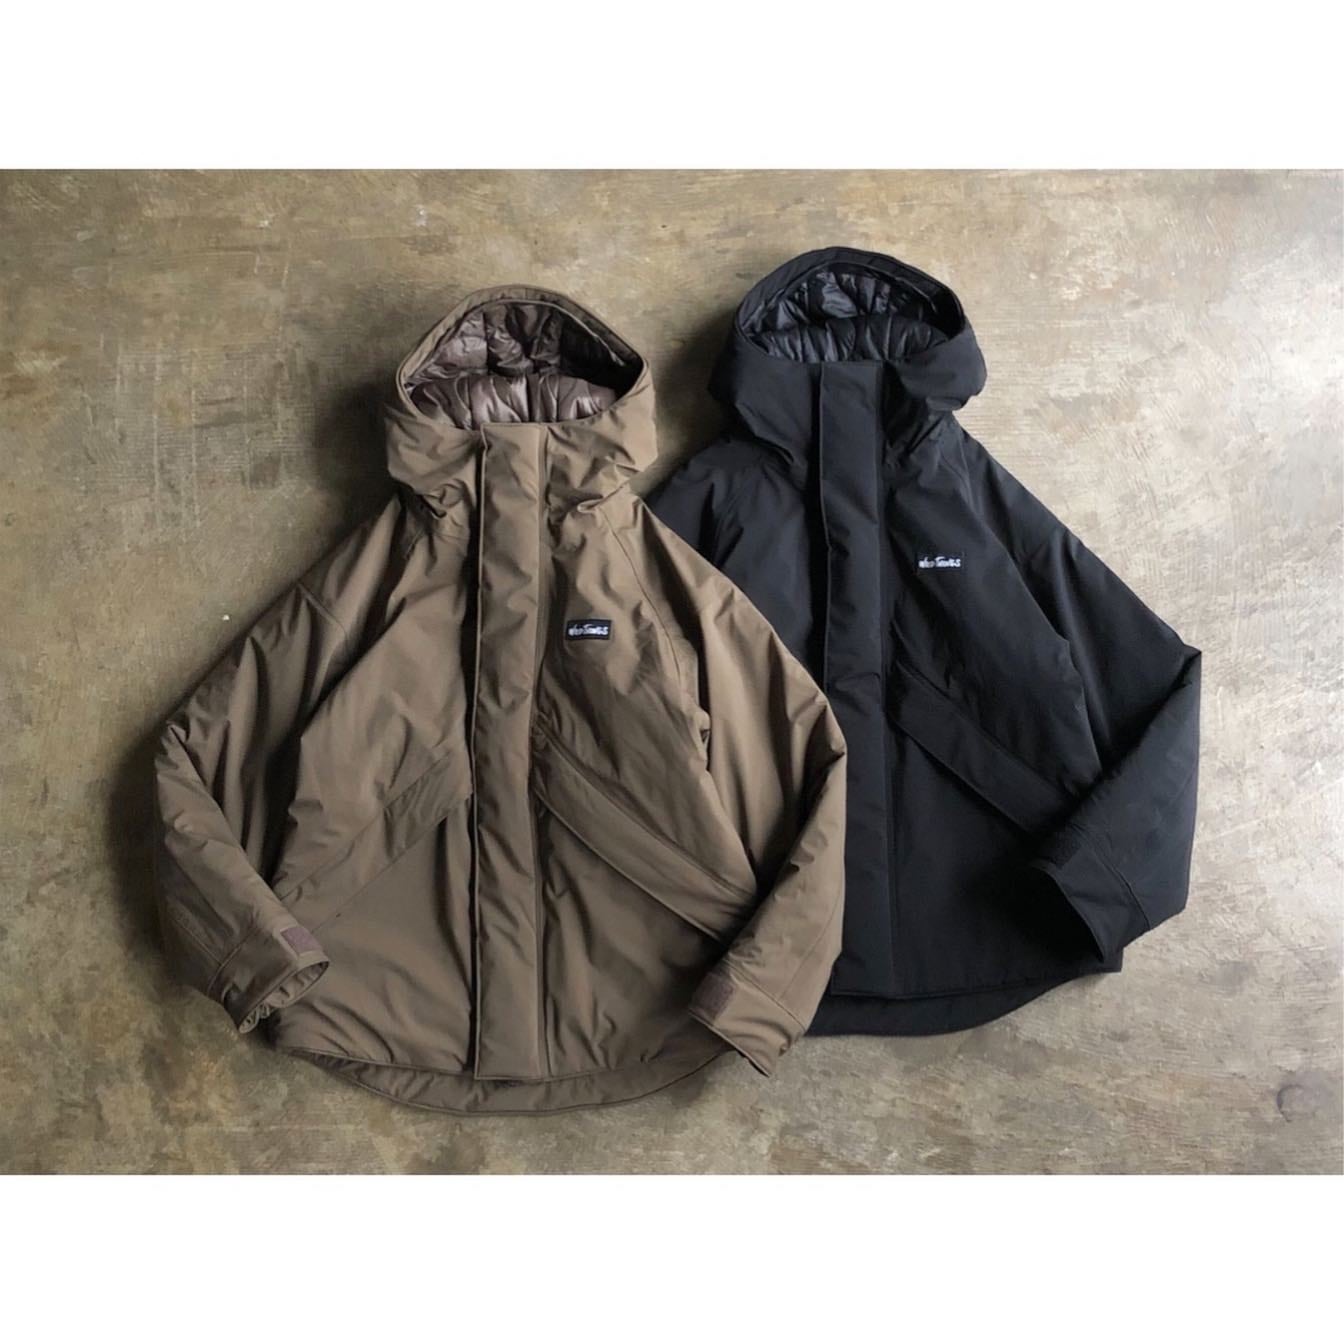 WILD THINGS (ワイルドシングス) PERTEX DENALI Jacket | AUTHENTIC Life Store powered  by BASE